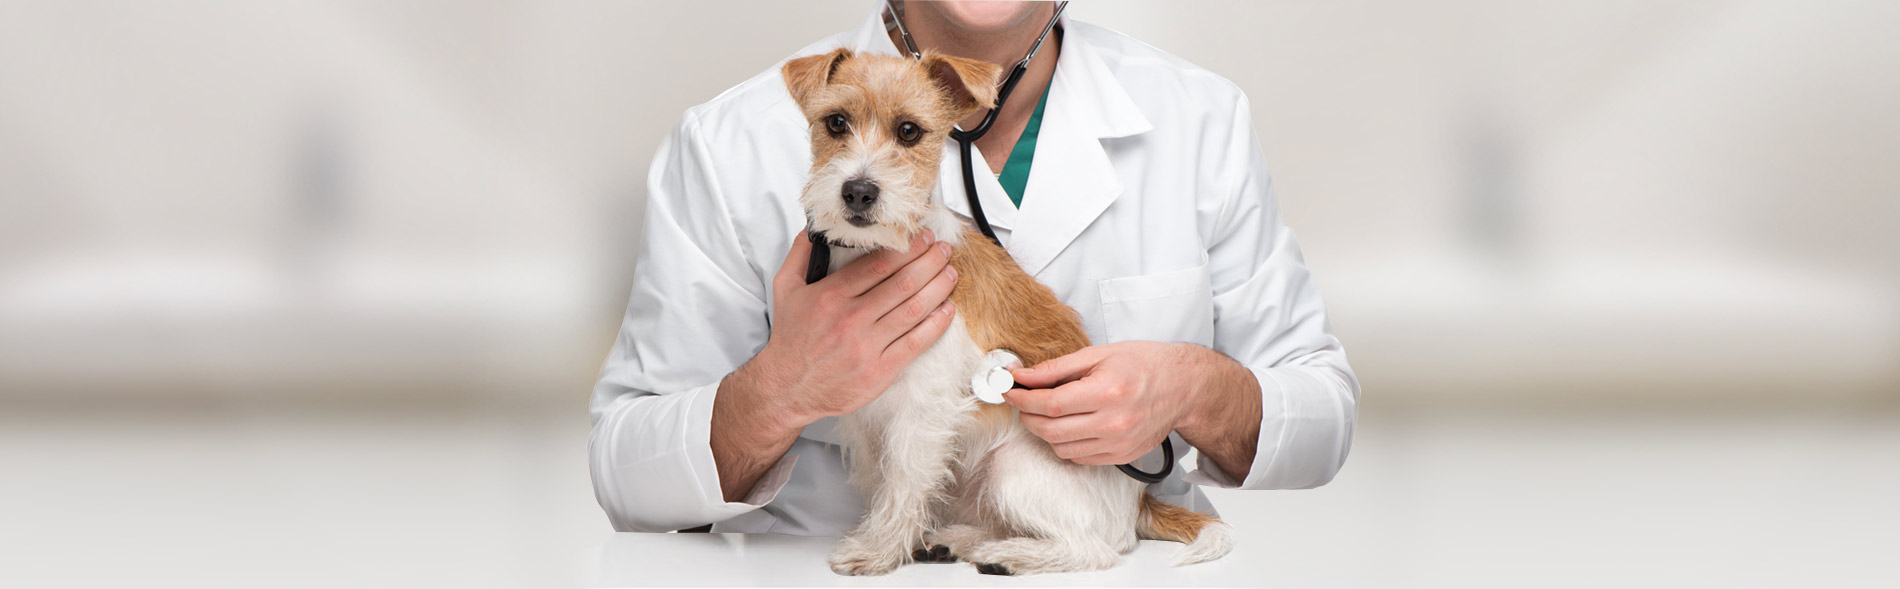 Pet Services That You Can Trust At Bluegrass Animal Hospital